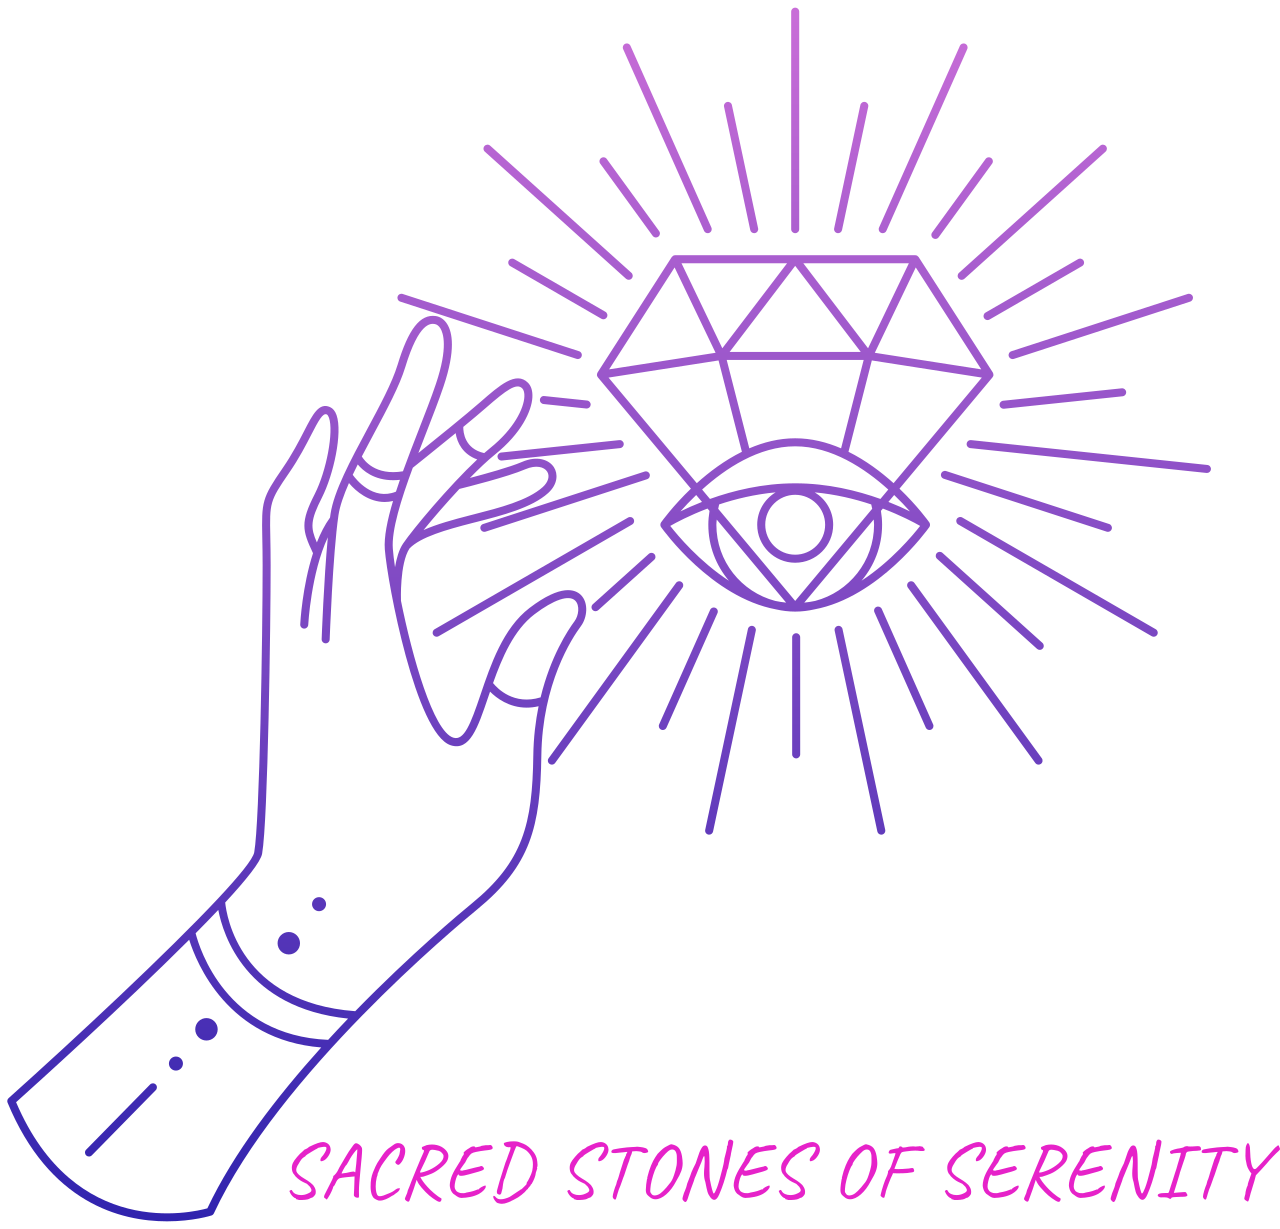 Sacred Stones of Serenity 's web page